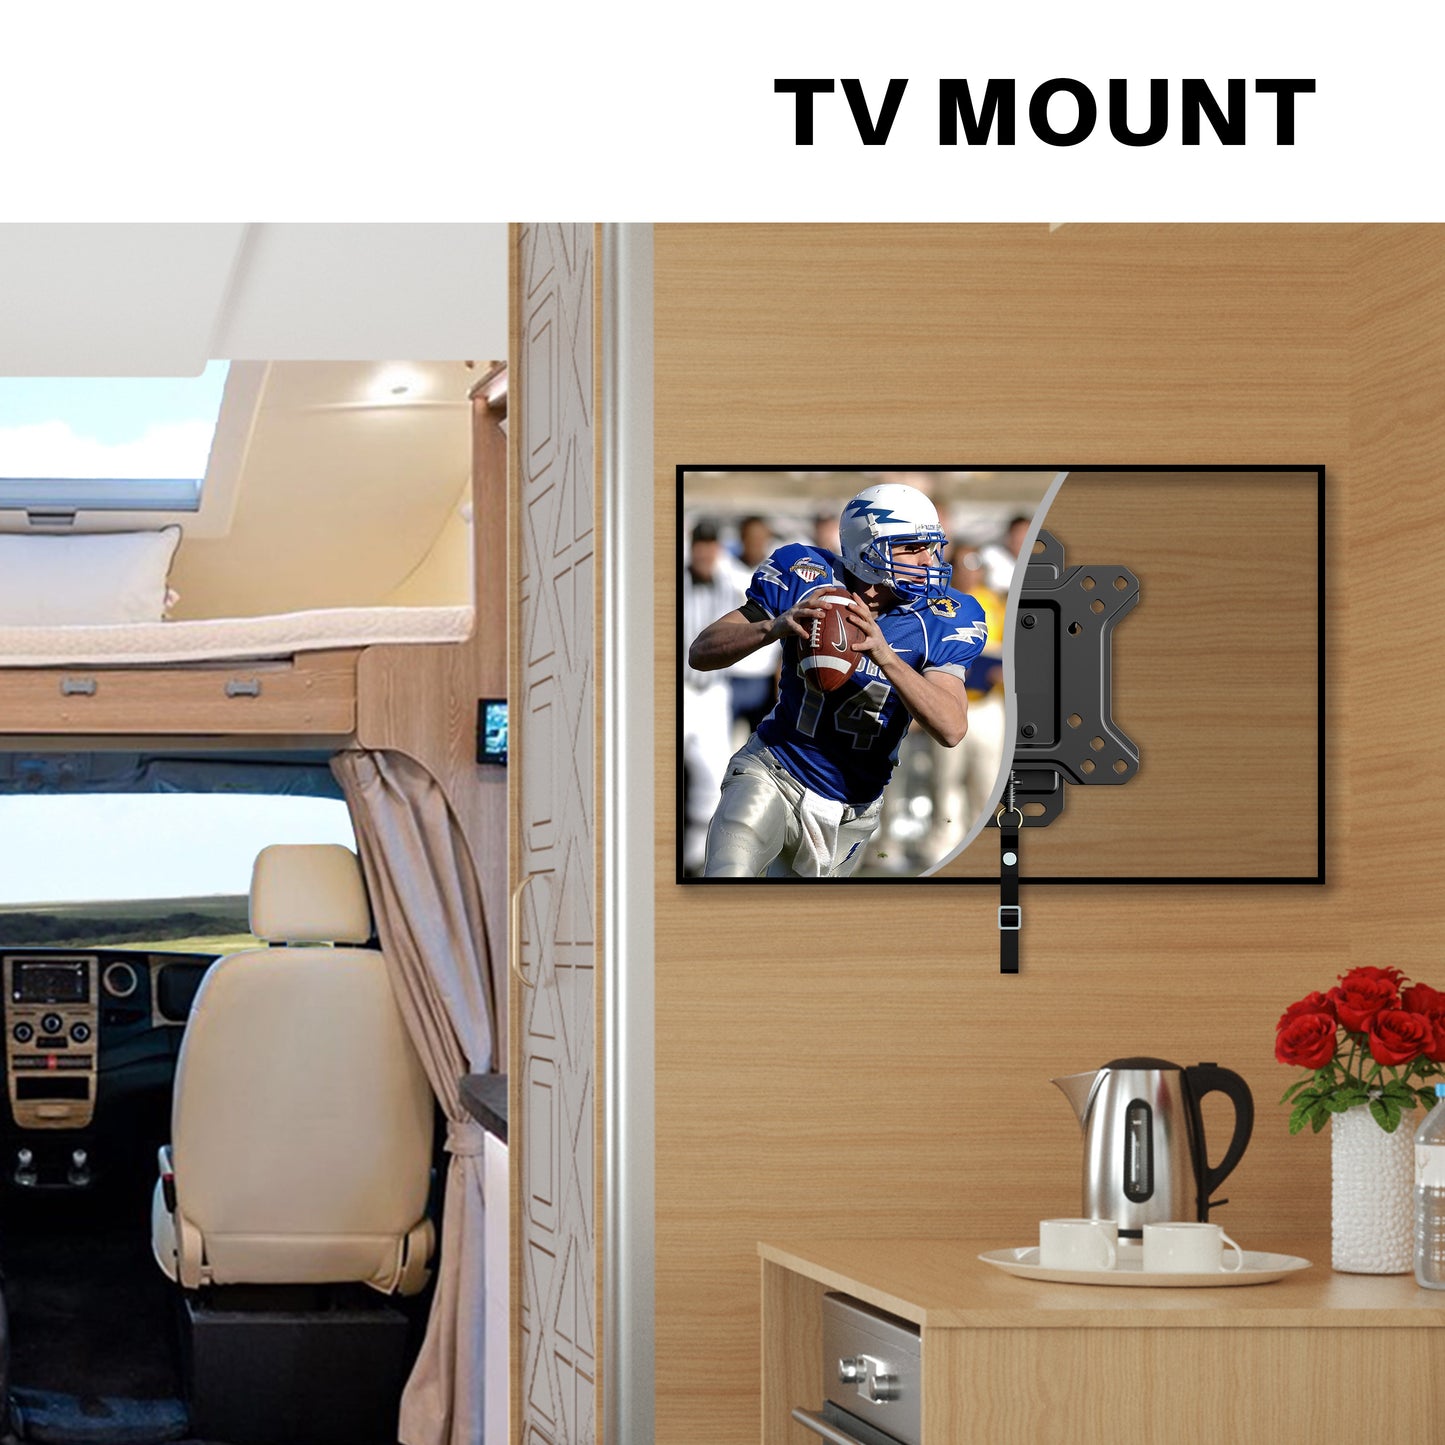 Mountliving Lockable RV TV Mount for Most 10-26 Inch LED, Flat Screen TVs RV Mount on Motor Home Camper Truck Marine Boat Trailer Full Motion TV Wall Mount up to 33 lbs VESA 100x100mm Easy One Step Lock